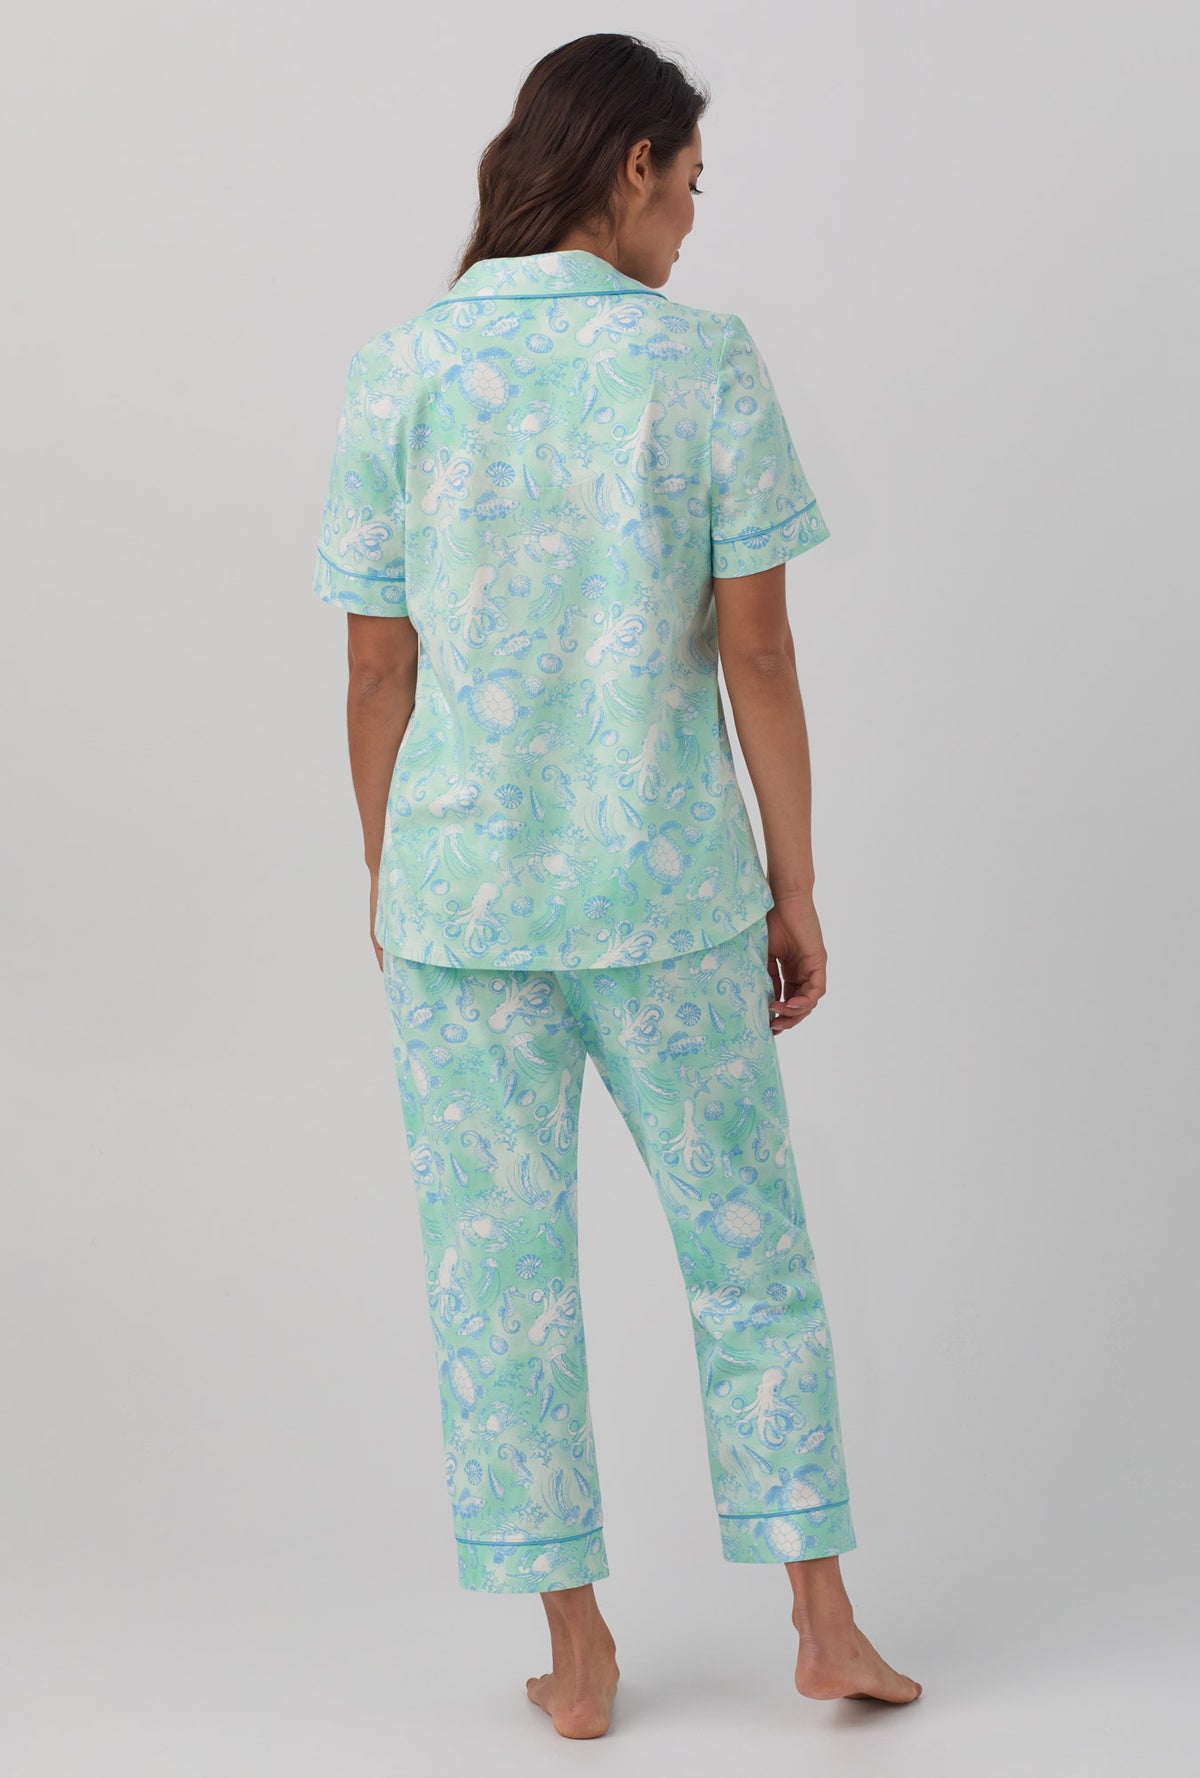 A lady wearing short sleeve stretch jersey cropped pj set with aquatic life print